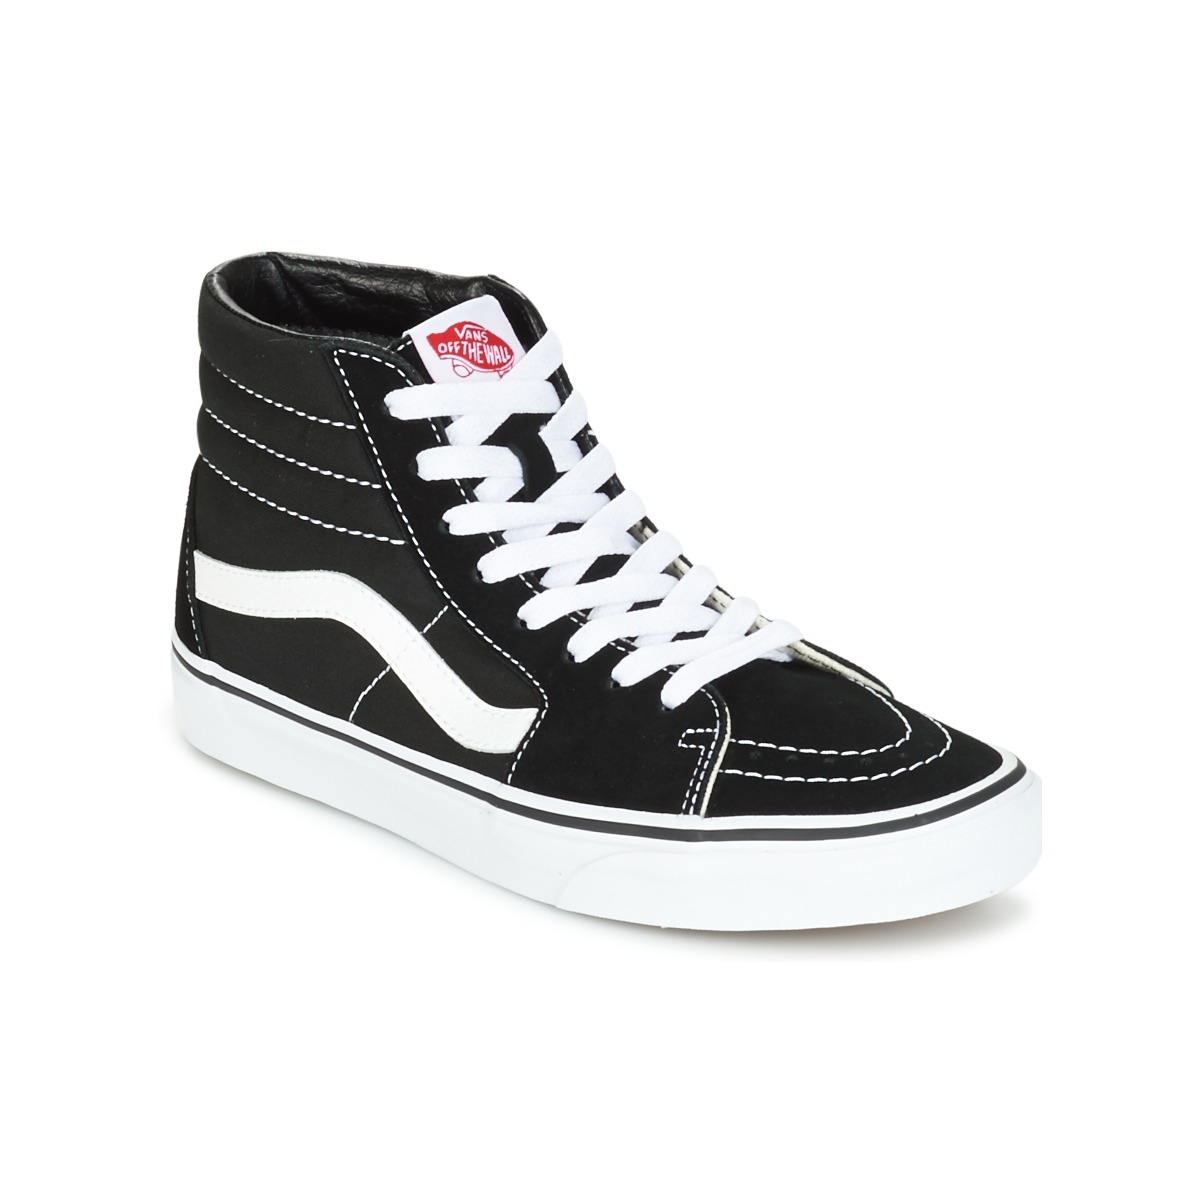 Shoes - | High White trainers top - Black Free Spartoo Vans / ! SK8-Hi NET delivery